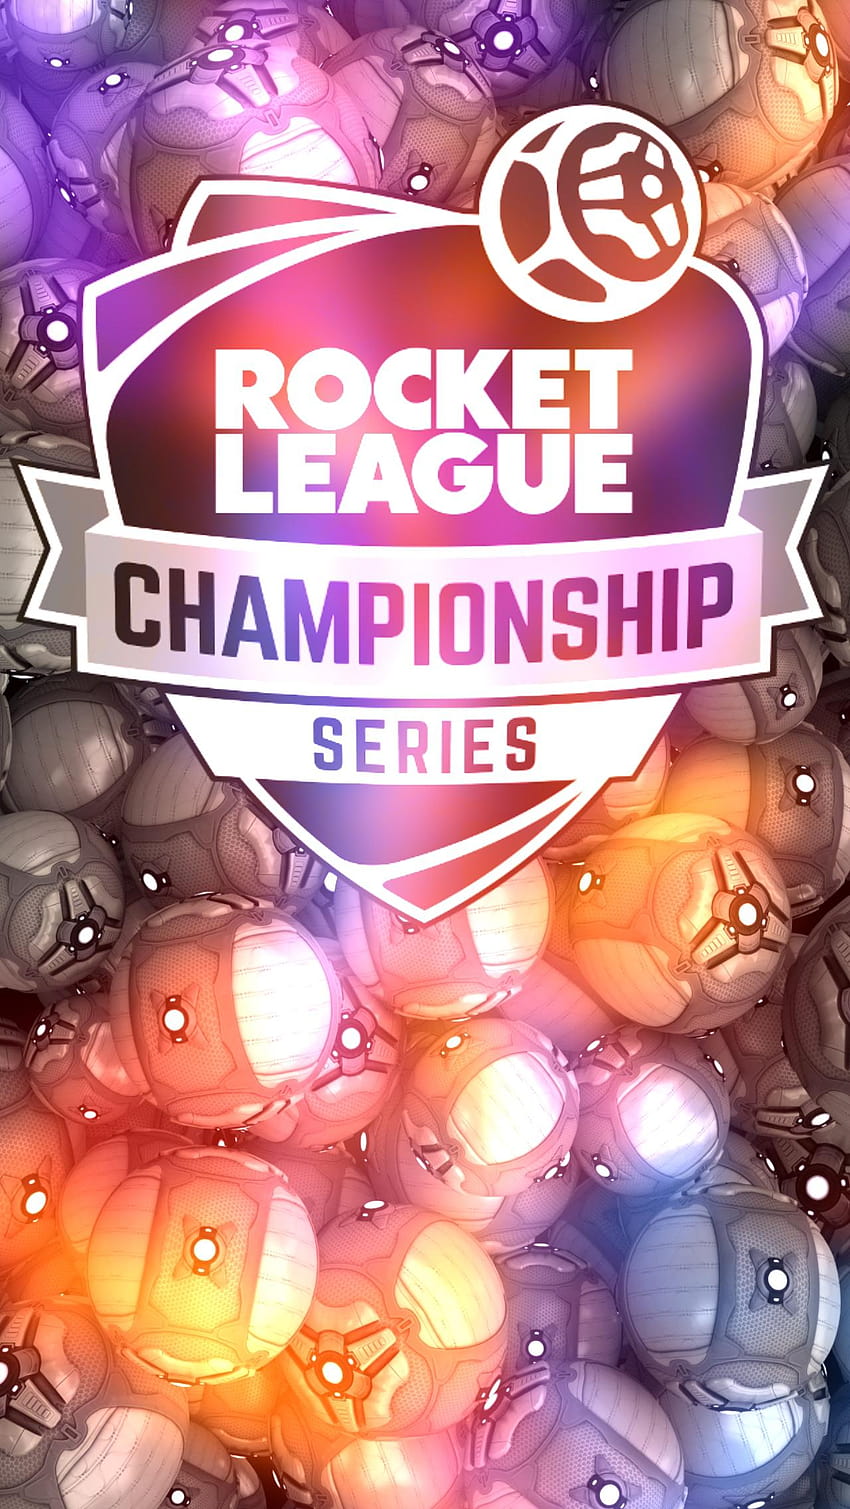 Rocket League Phone posted by ...cute, ロケットリーグ iphone HD電話の壁紙